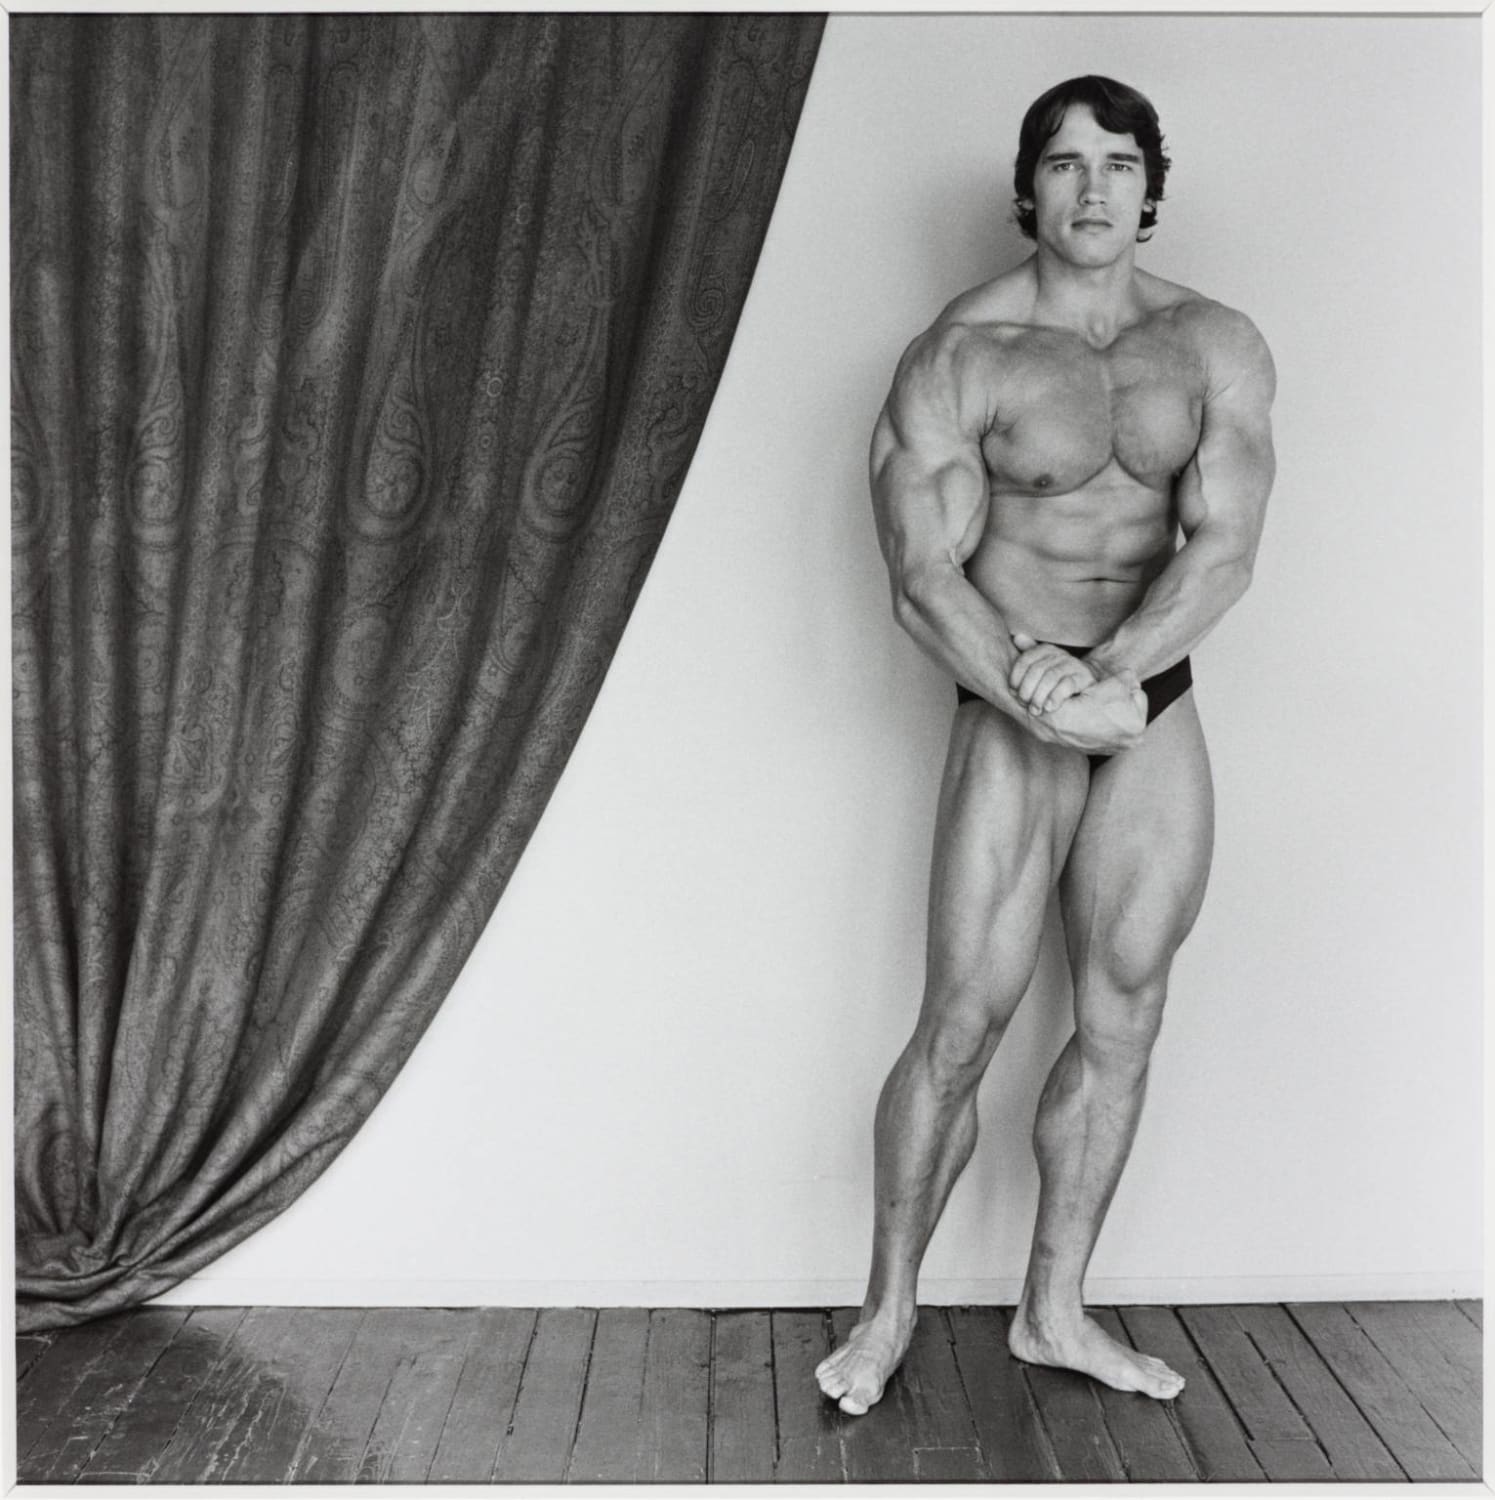 📸 In 1976 photographer Robert Mapplethorpe took this photo of bodybuilder & budding actor Arnold Schwarzenegger. Pictured here aged 29, he turns 72 today. Happy birthday